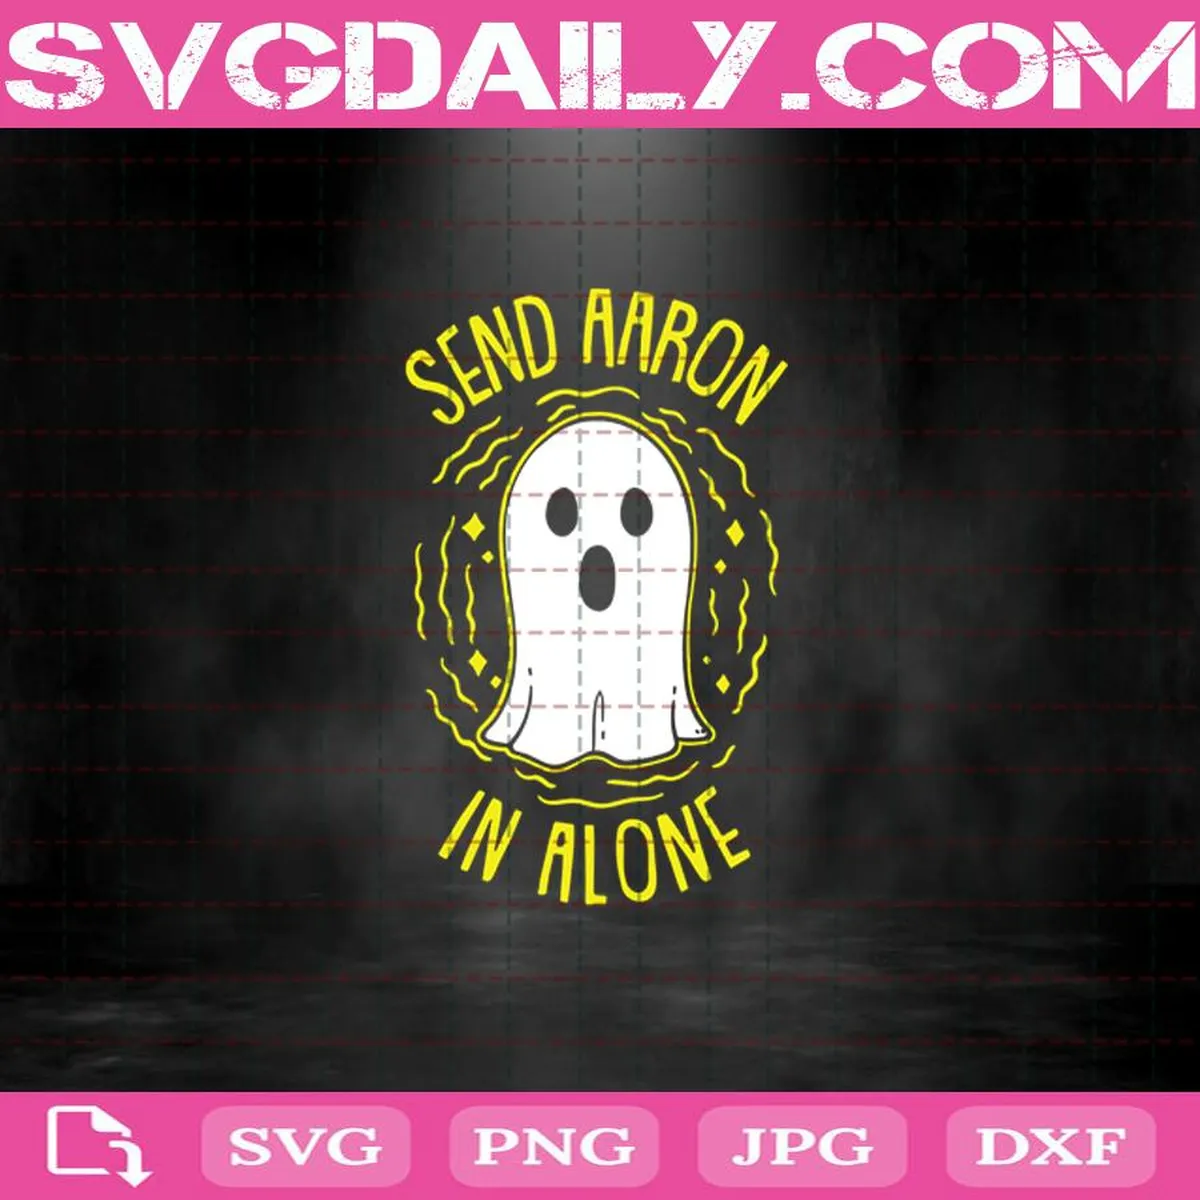 Send Aaron In Alone Svg, Funny Boo Svg, Ghost Halloween Svg, Halloween Boo Svg, Boo Svg, Halloween Svg